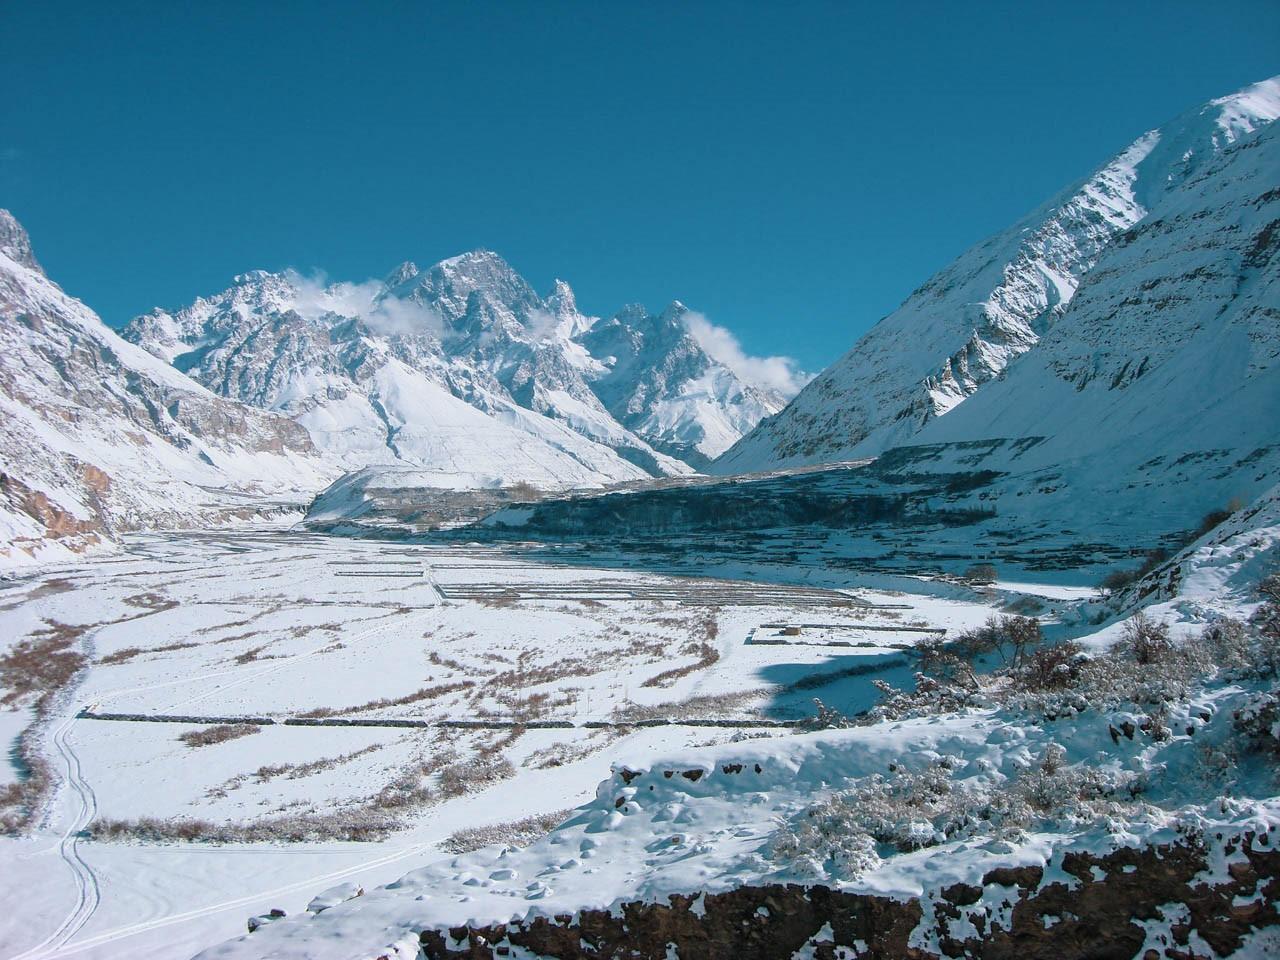 Shimshal Valley, home to many amazing glaciers